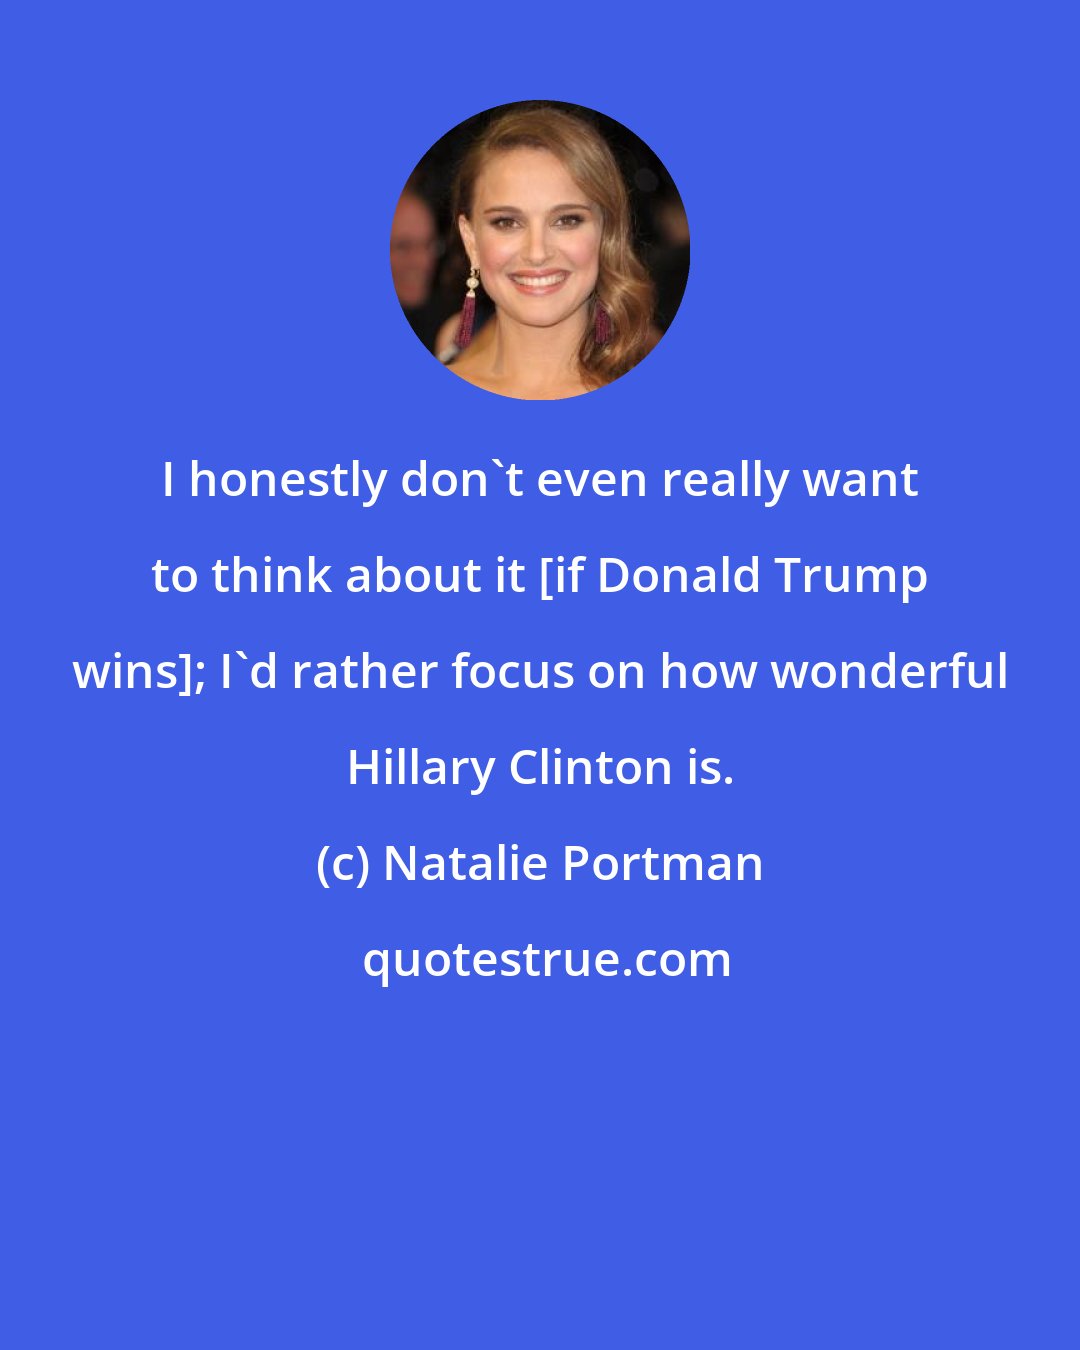 Natalie Portman: I honestly don't even really want to think about it [if Donald Trump wins]; I'd rather focus on how wonderful Hillary Clinton is.